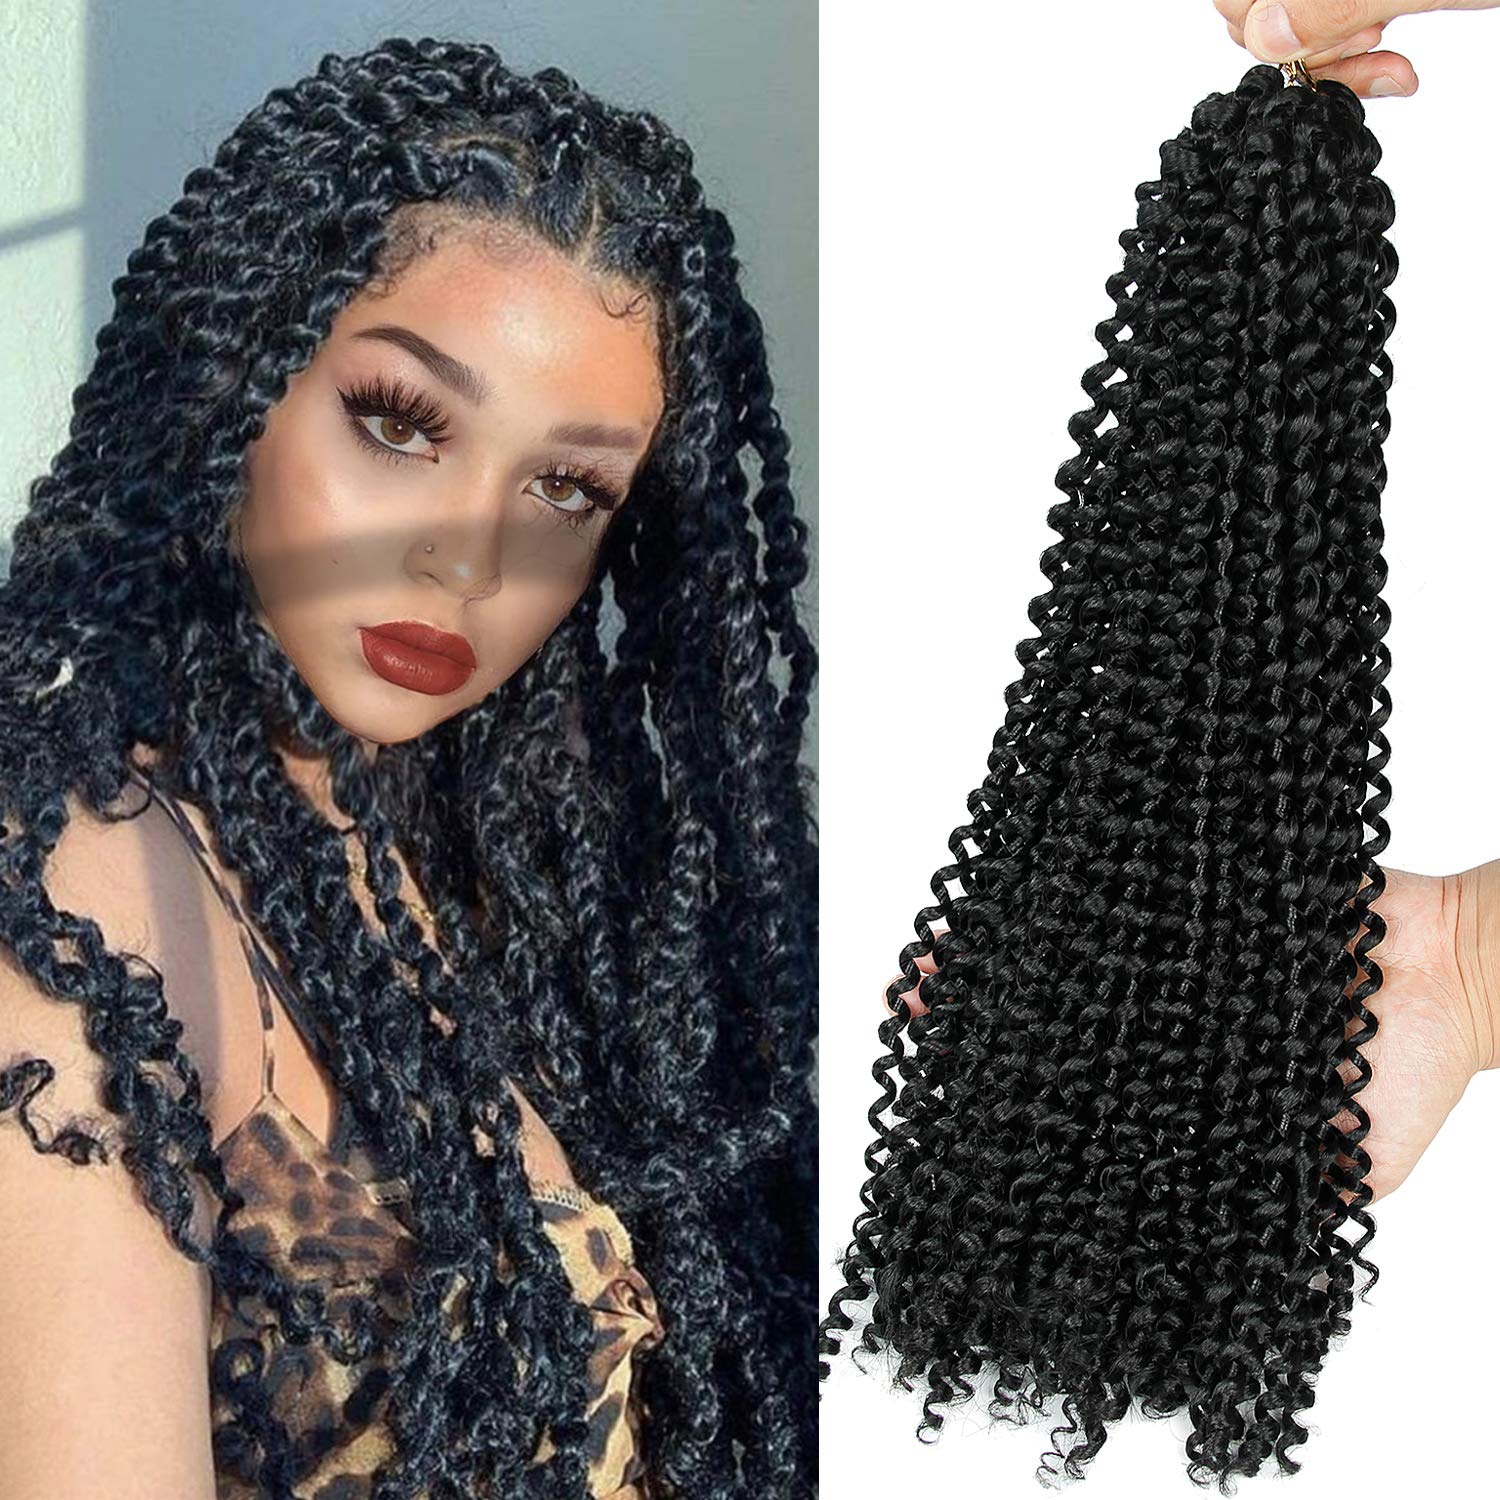 22inches Water Wave For Passion Twist Hair Synthetic 22" Water Wave Passion Pre Twisted Spring Kinky Crochet Braiding Hair